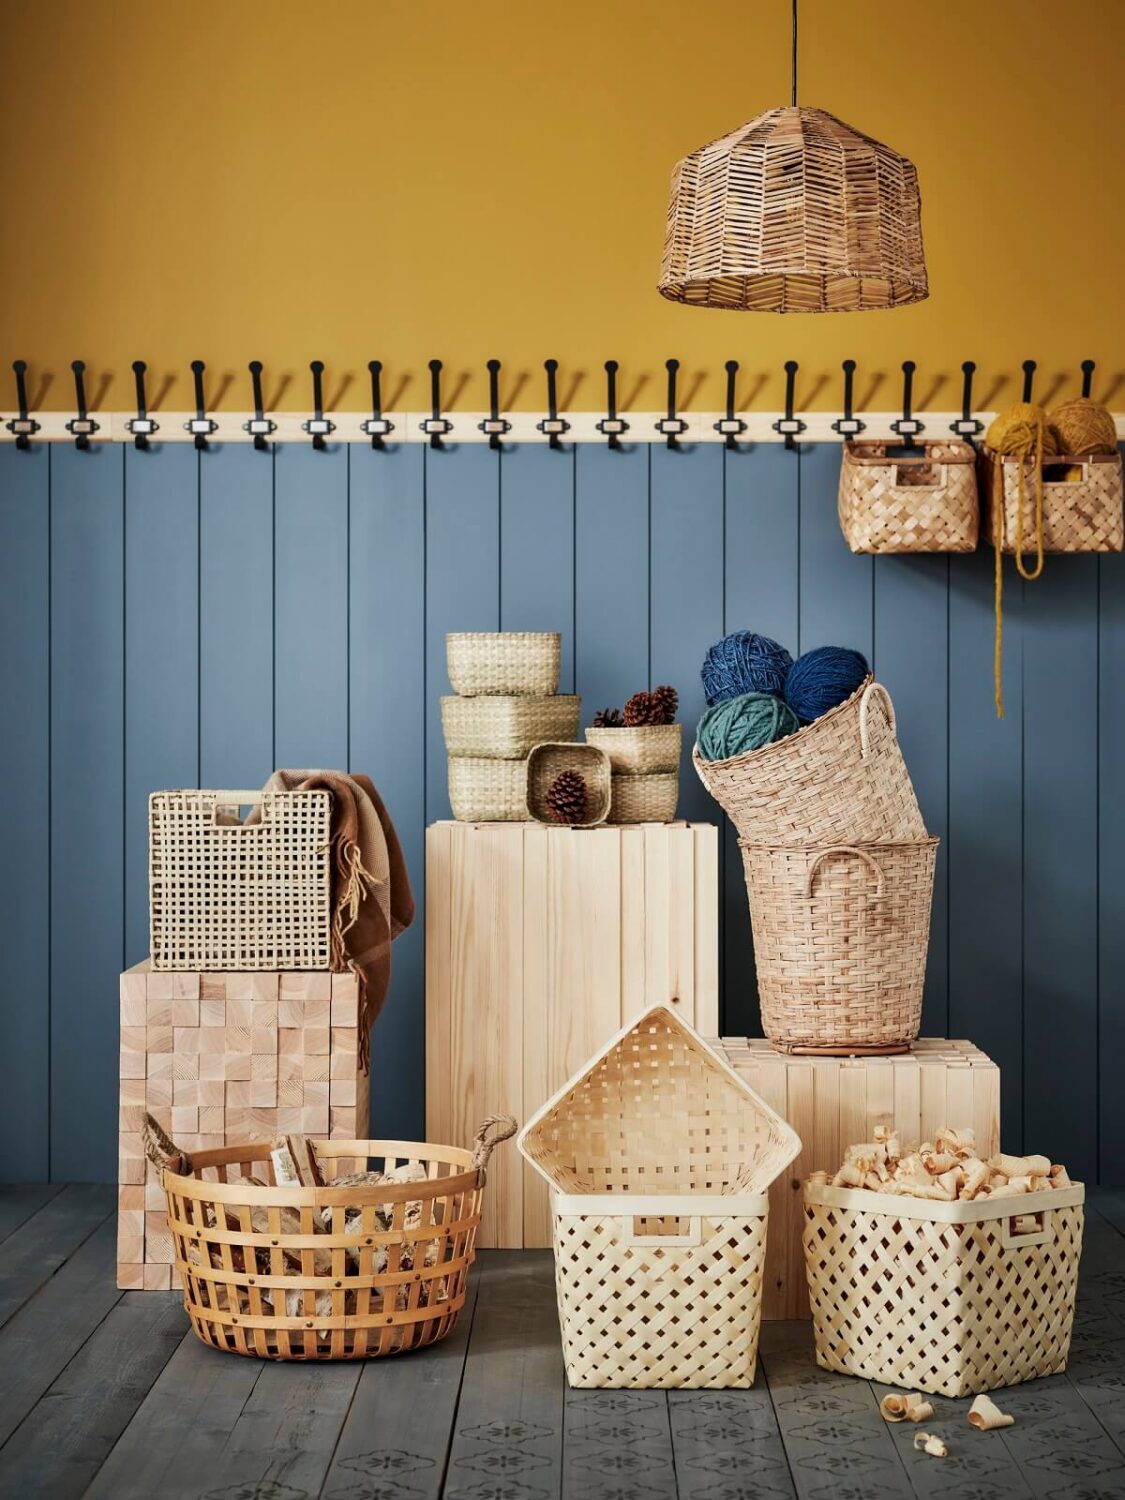 IKEA_VAXTHUS_baskets-october-products-nordroom